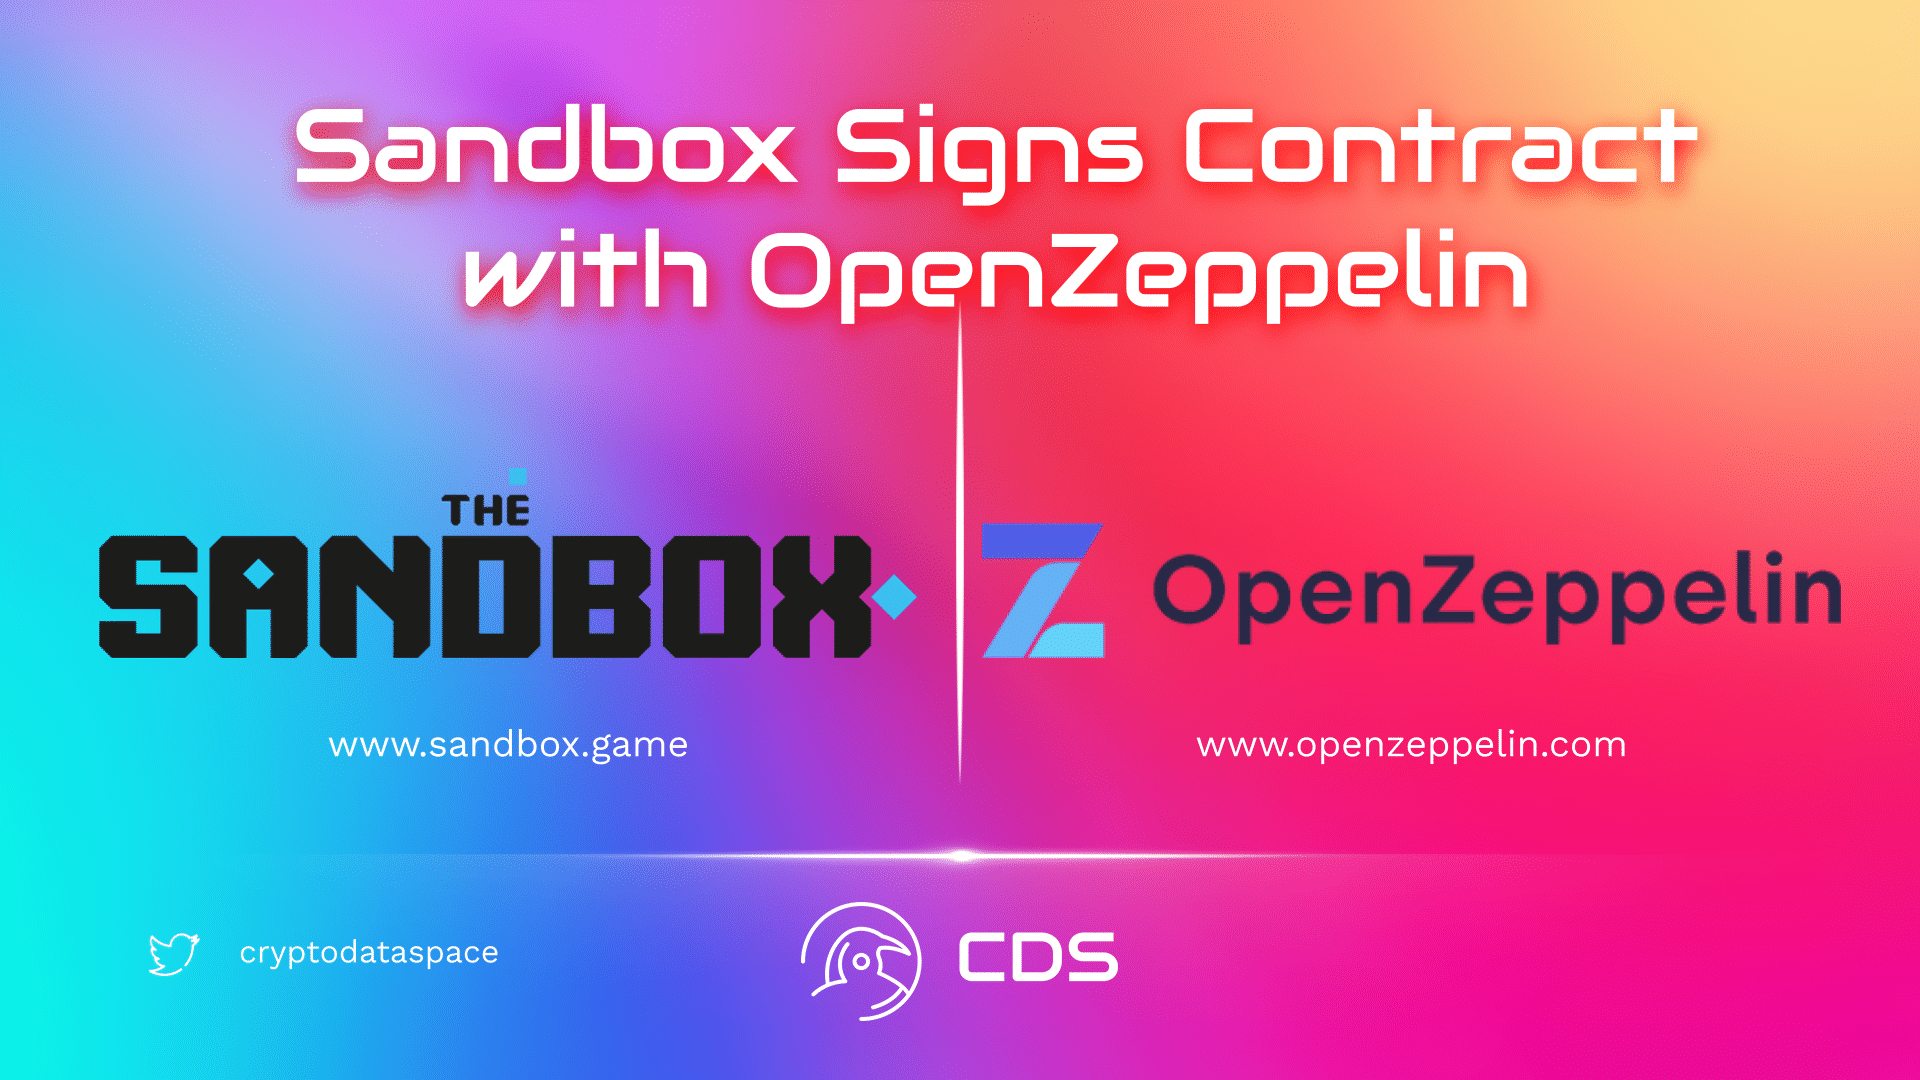 Sandbox Signs Contract with OpenZeppelin